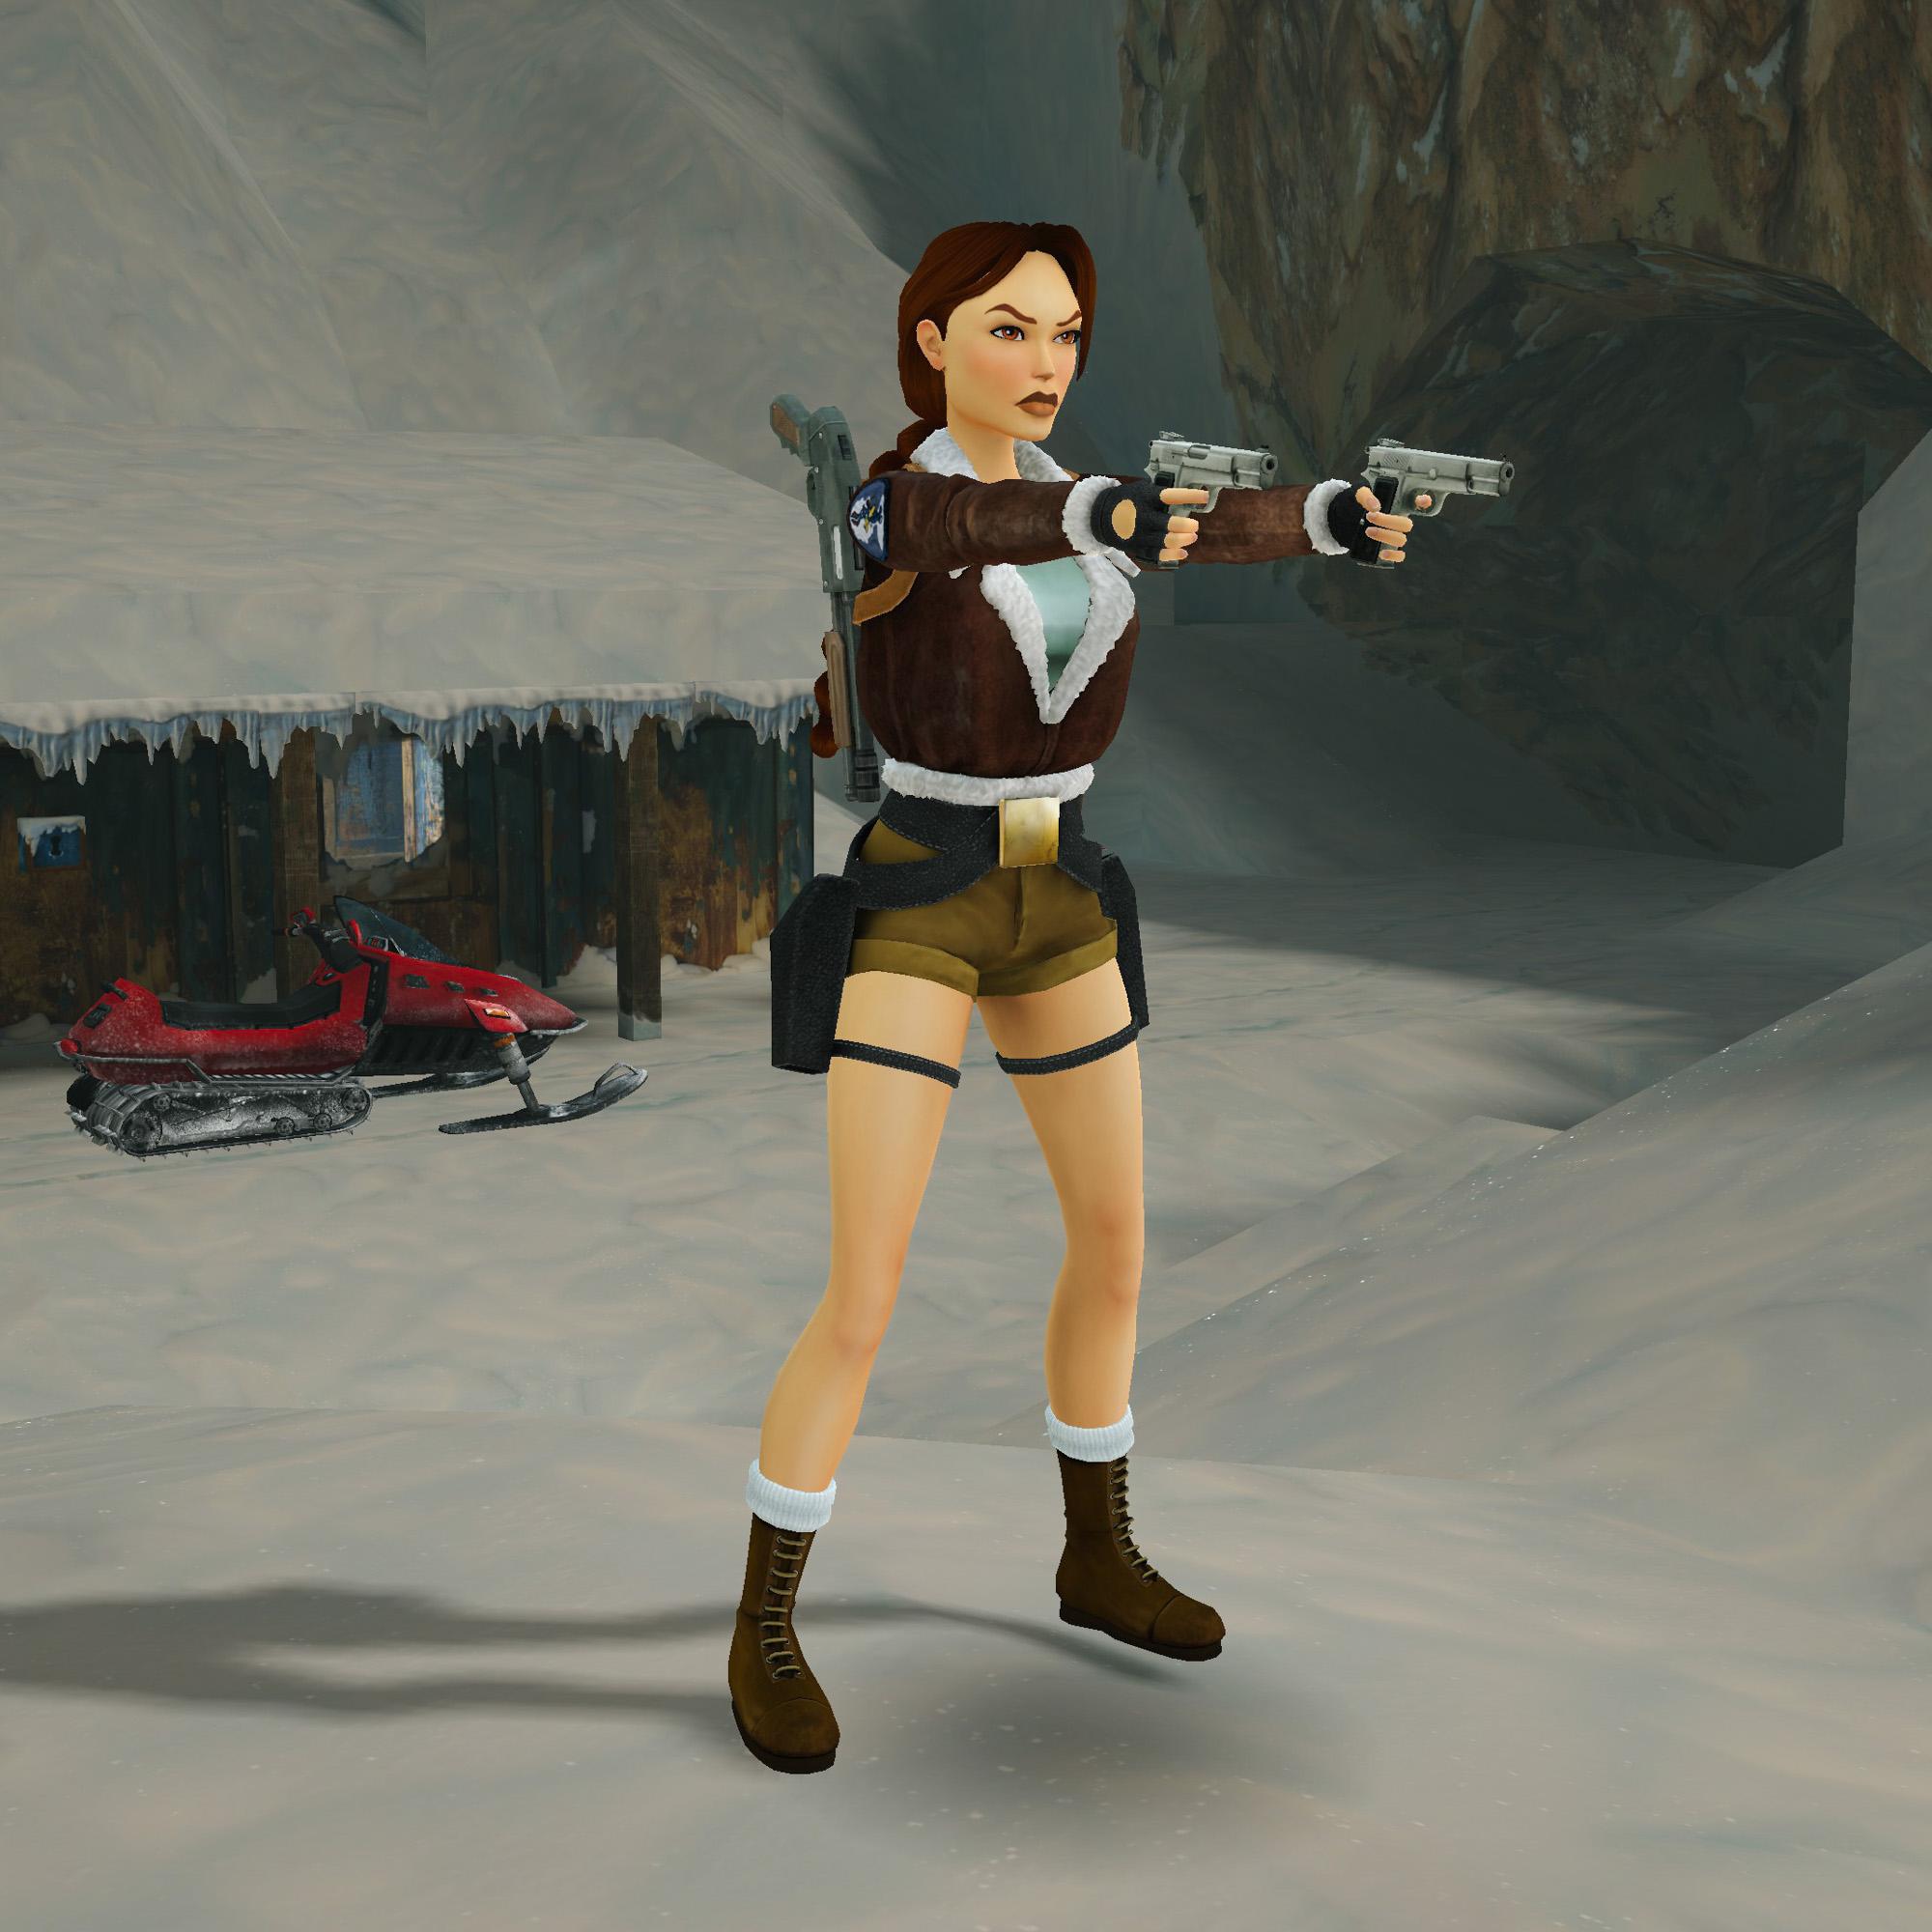 Lara Croft aiming her dual pistols with a red snowmobile behind her.